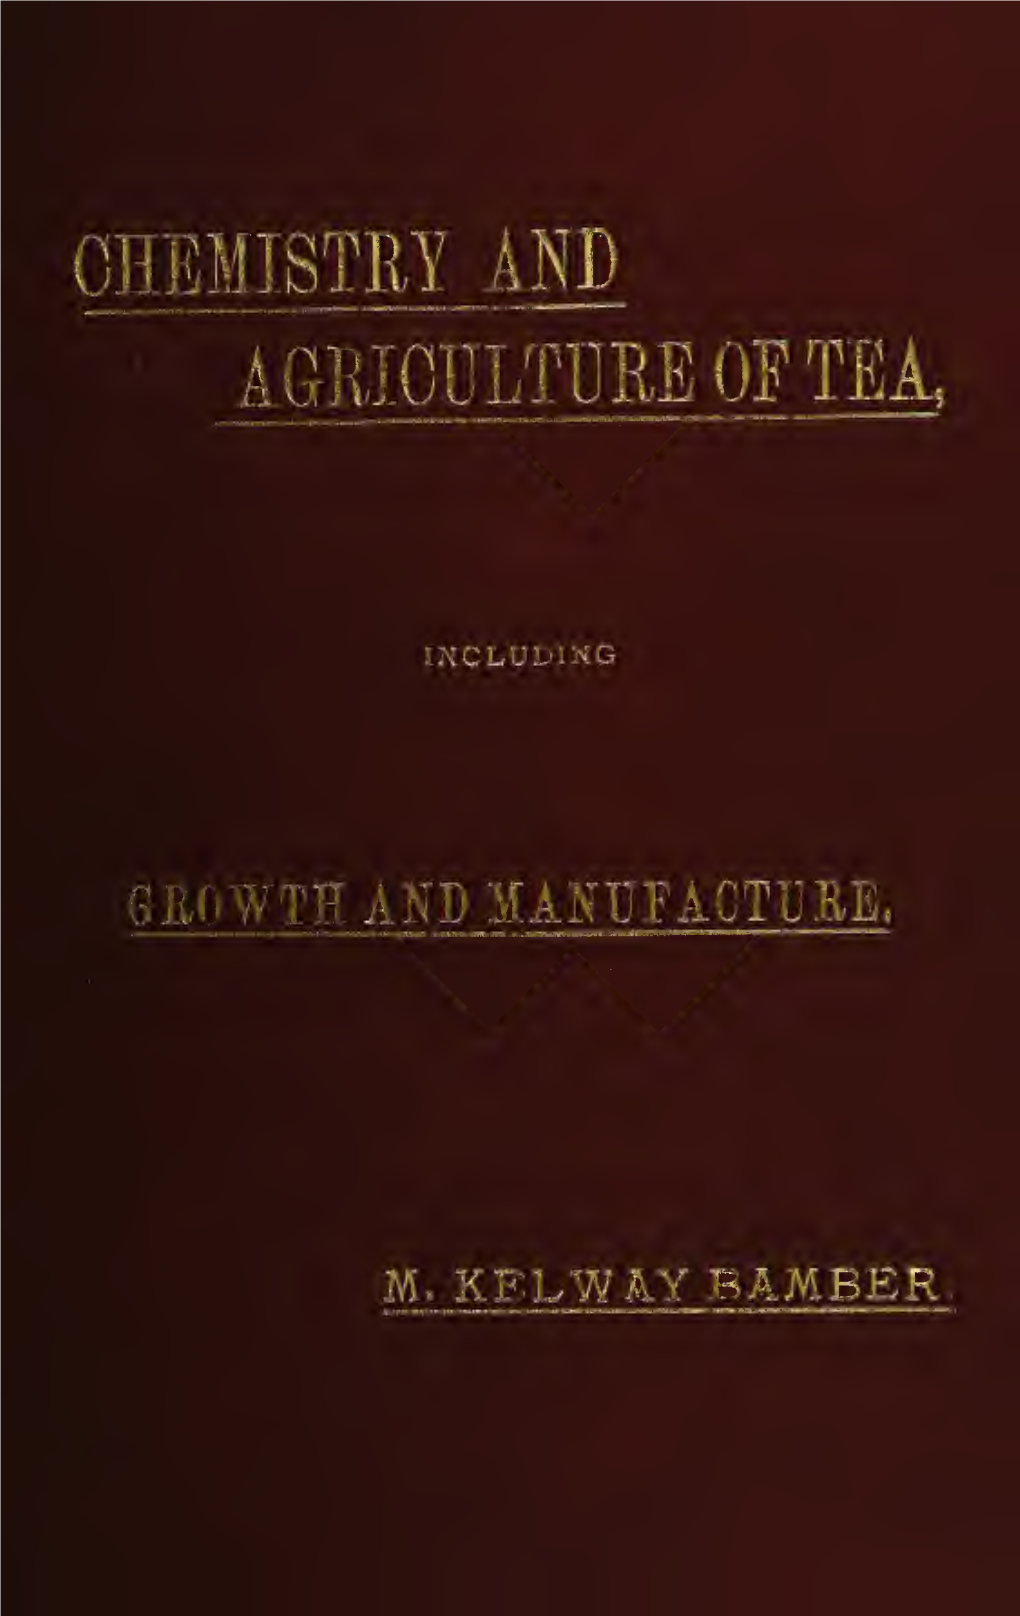 A Text Book on the Chemistry and Agriculture Of